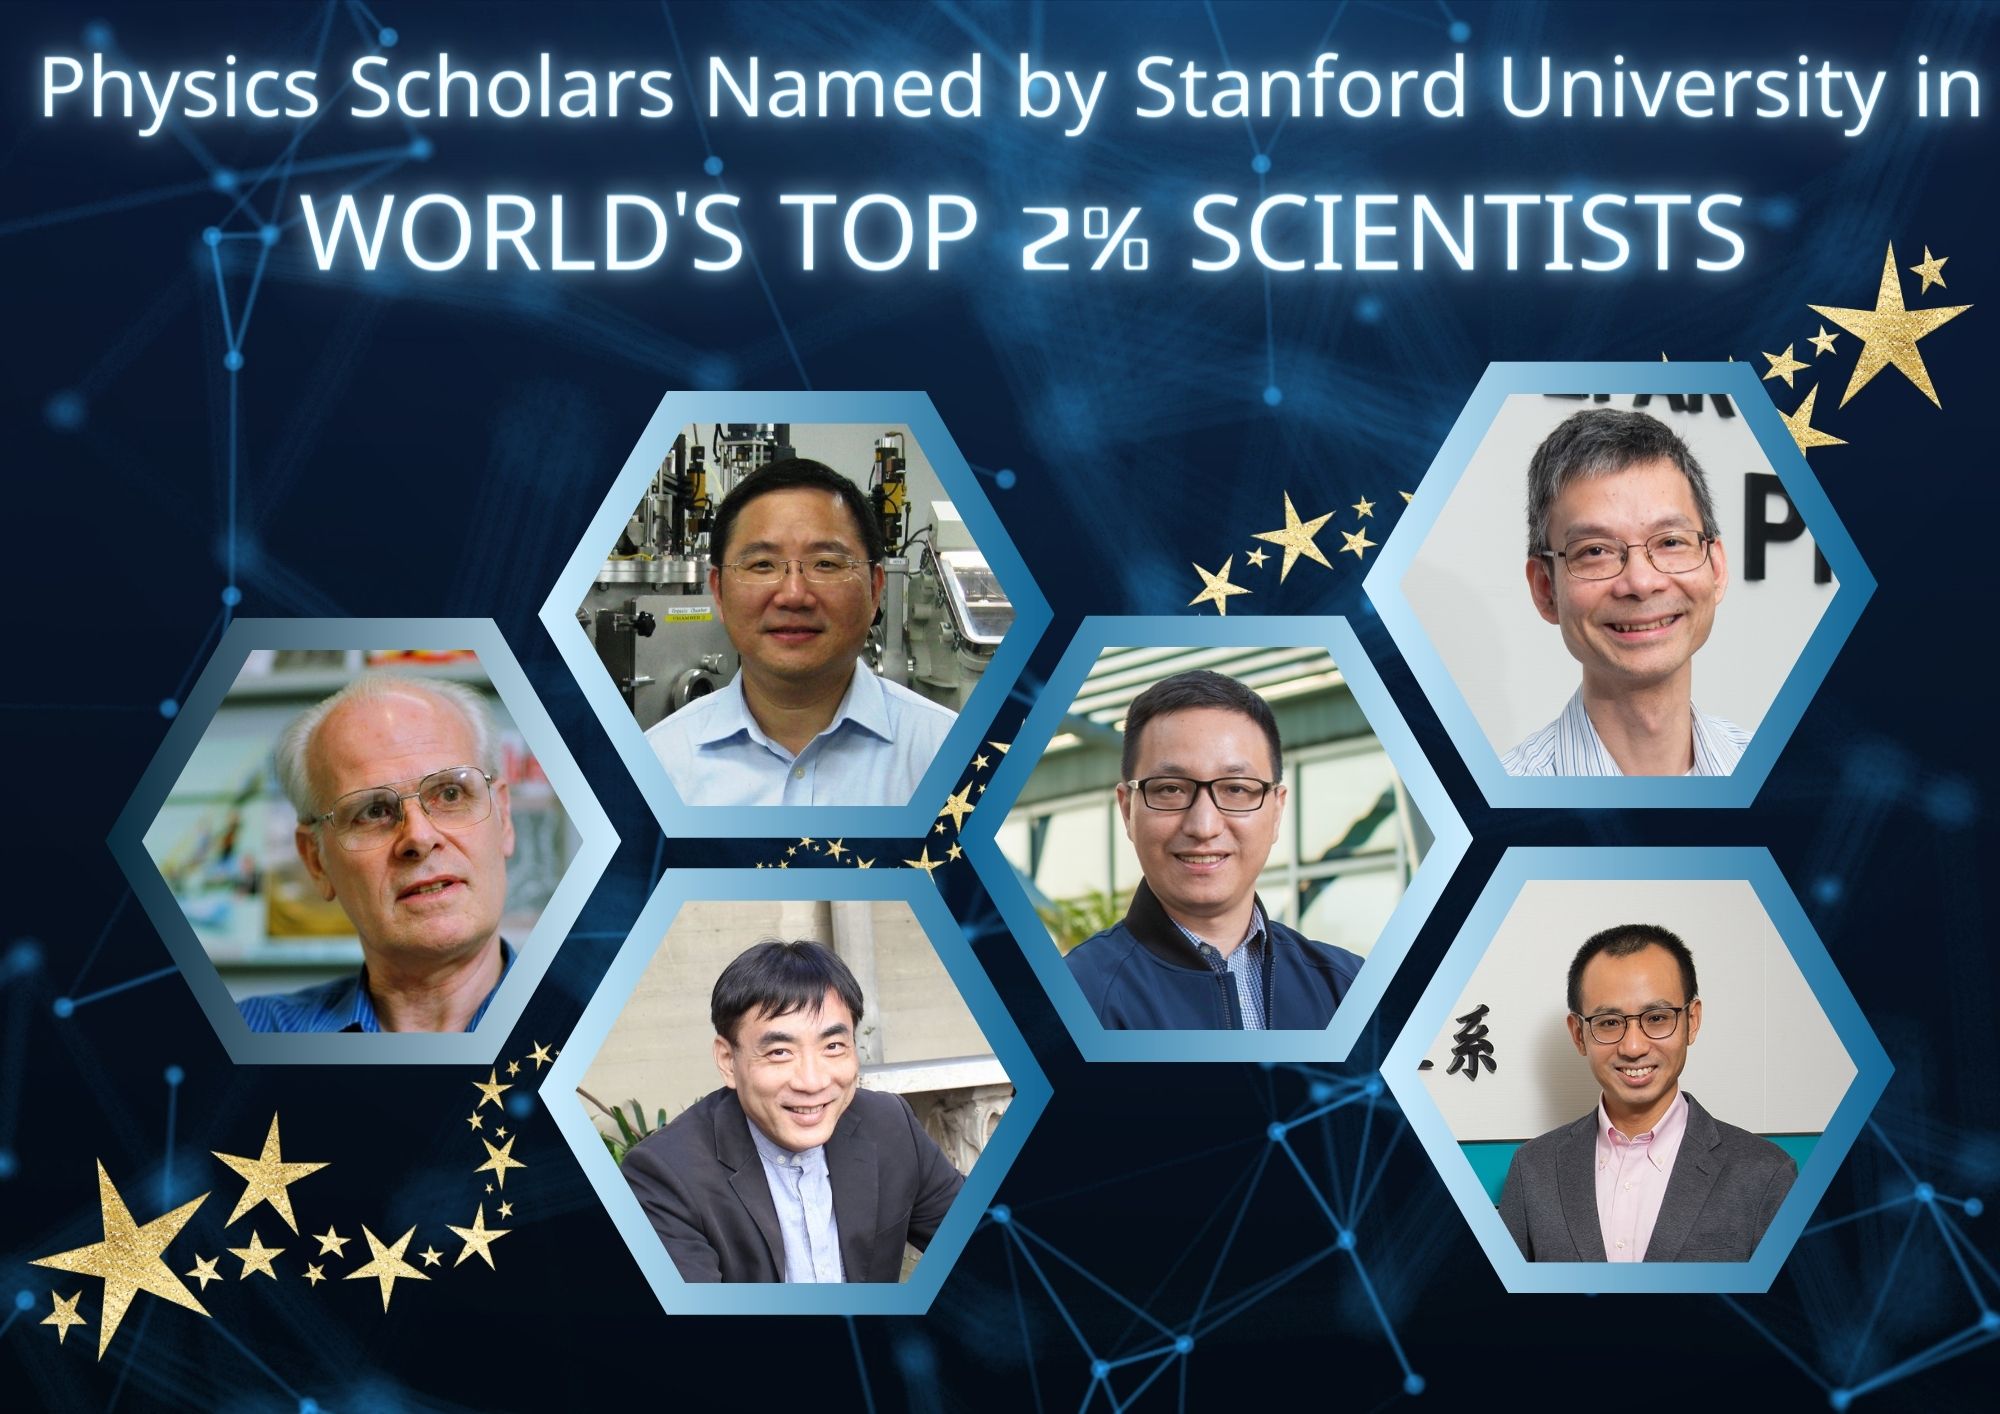 Six Faculty Members Listed as the World's Top 2% Most-Cited Scientists